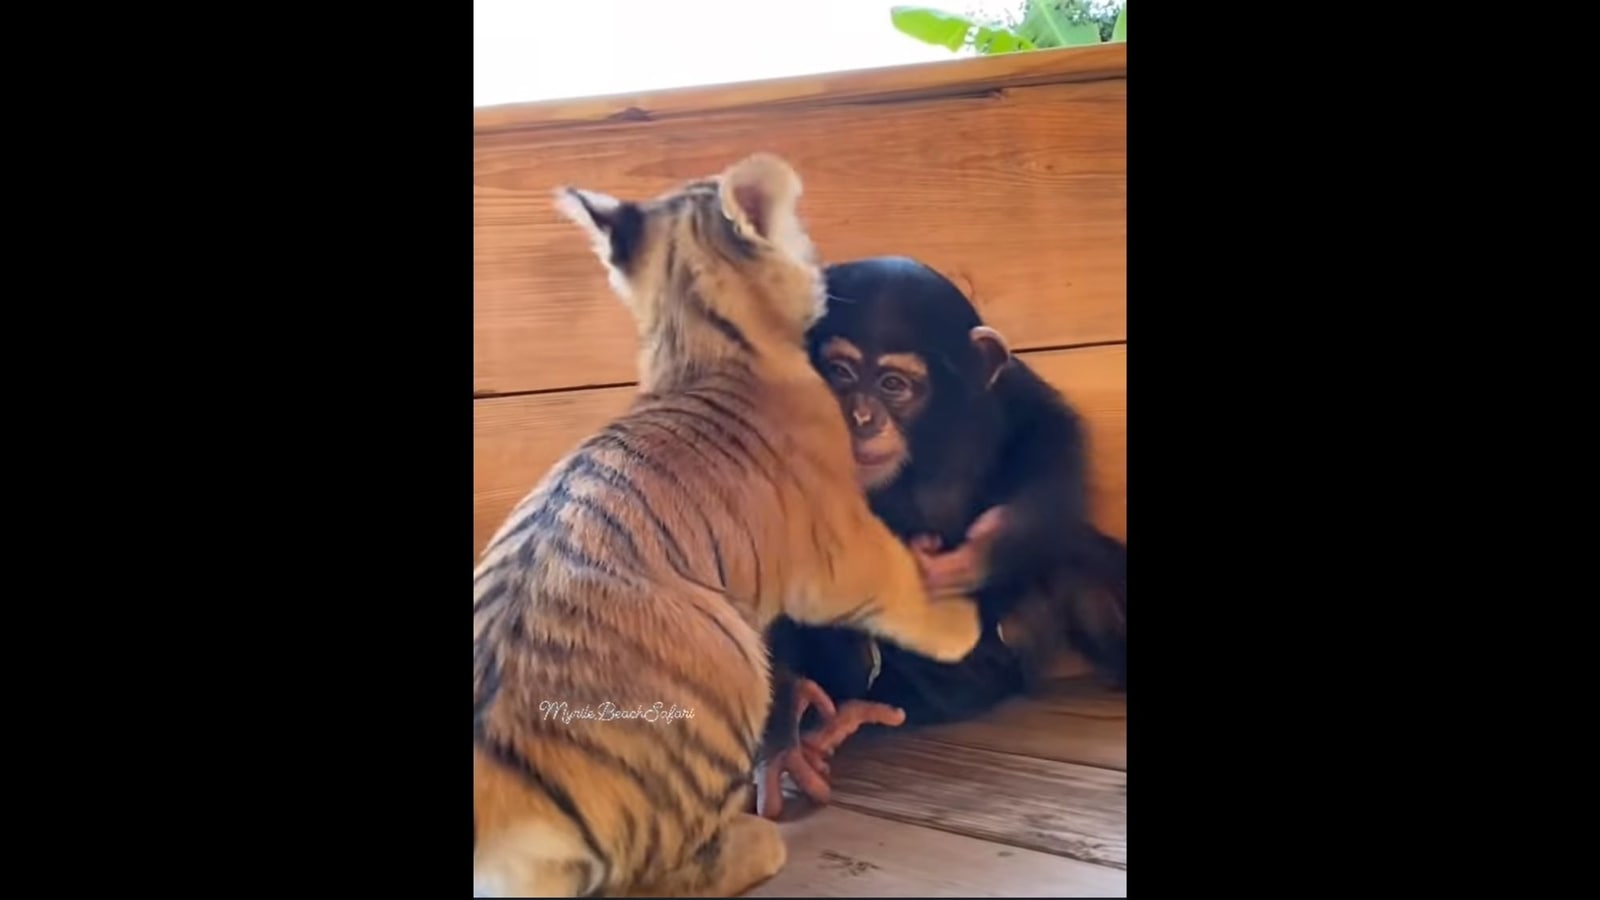 Baby chimpanzee and tiger cubs play lovingly in viral video